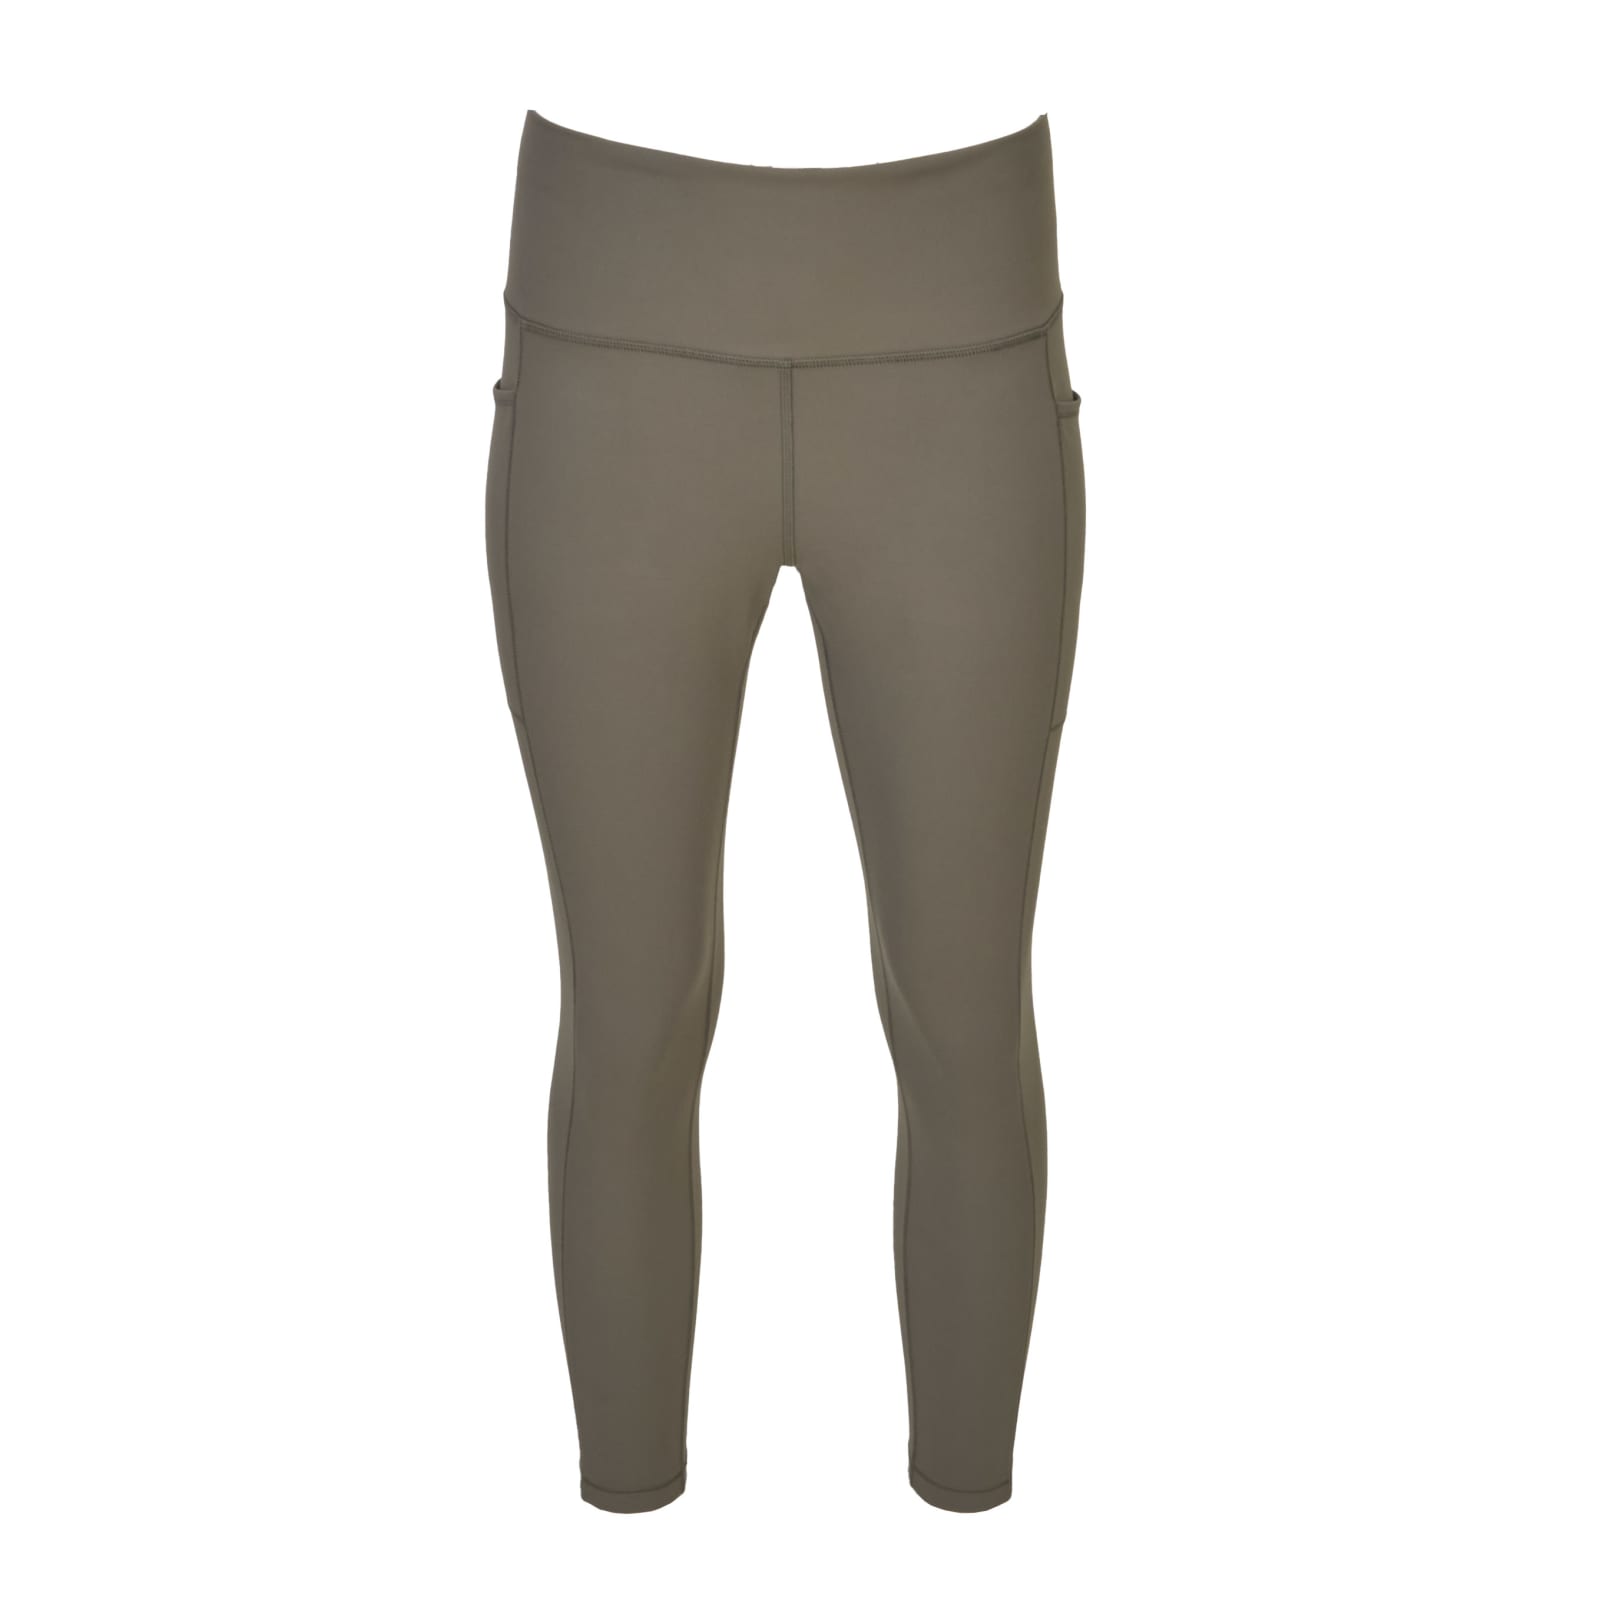 Women's Carbon Peached Ankle Length Leggings by RBX at Fleet Farm